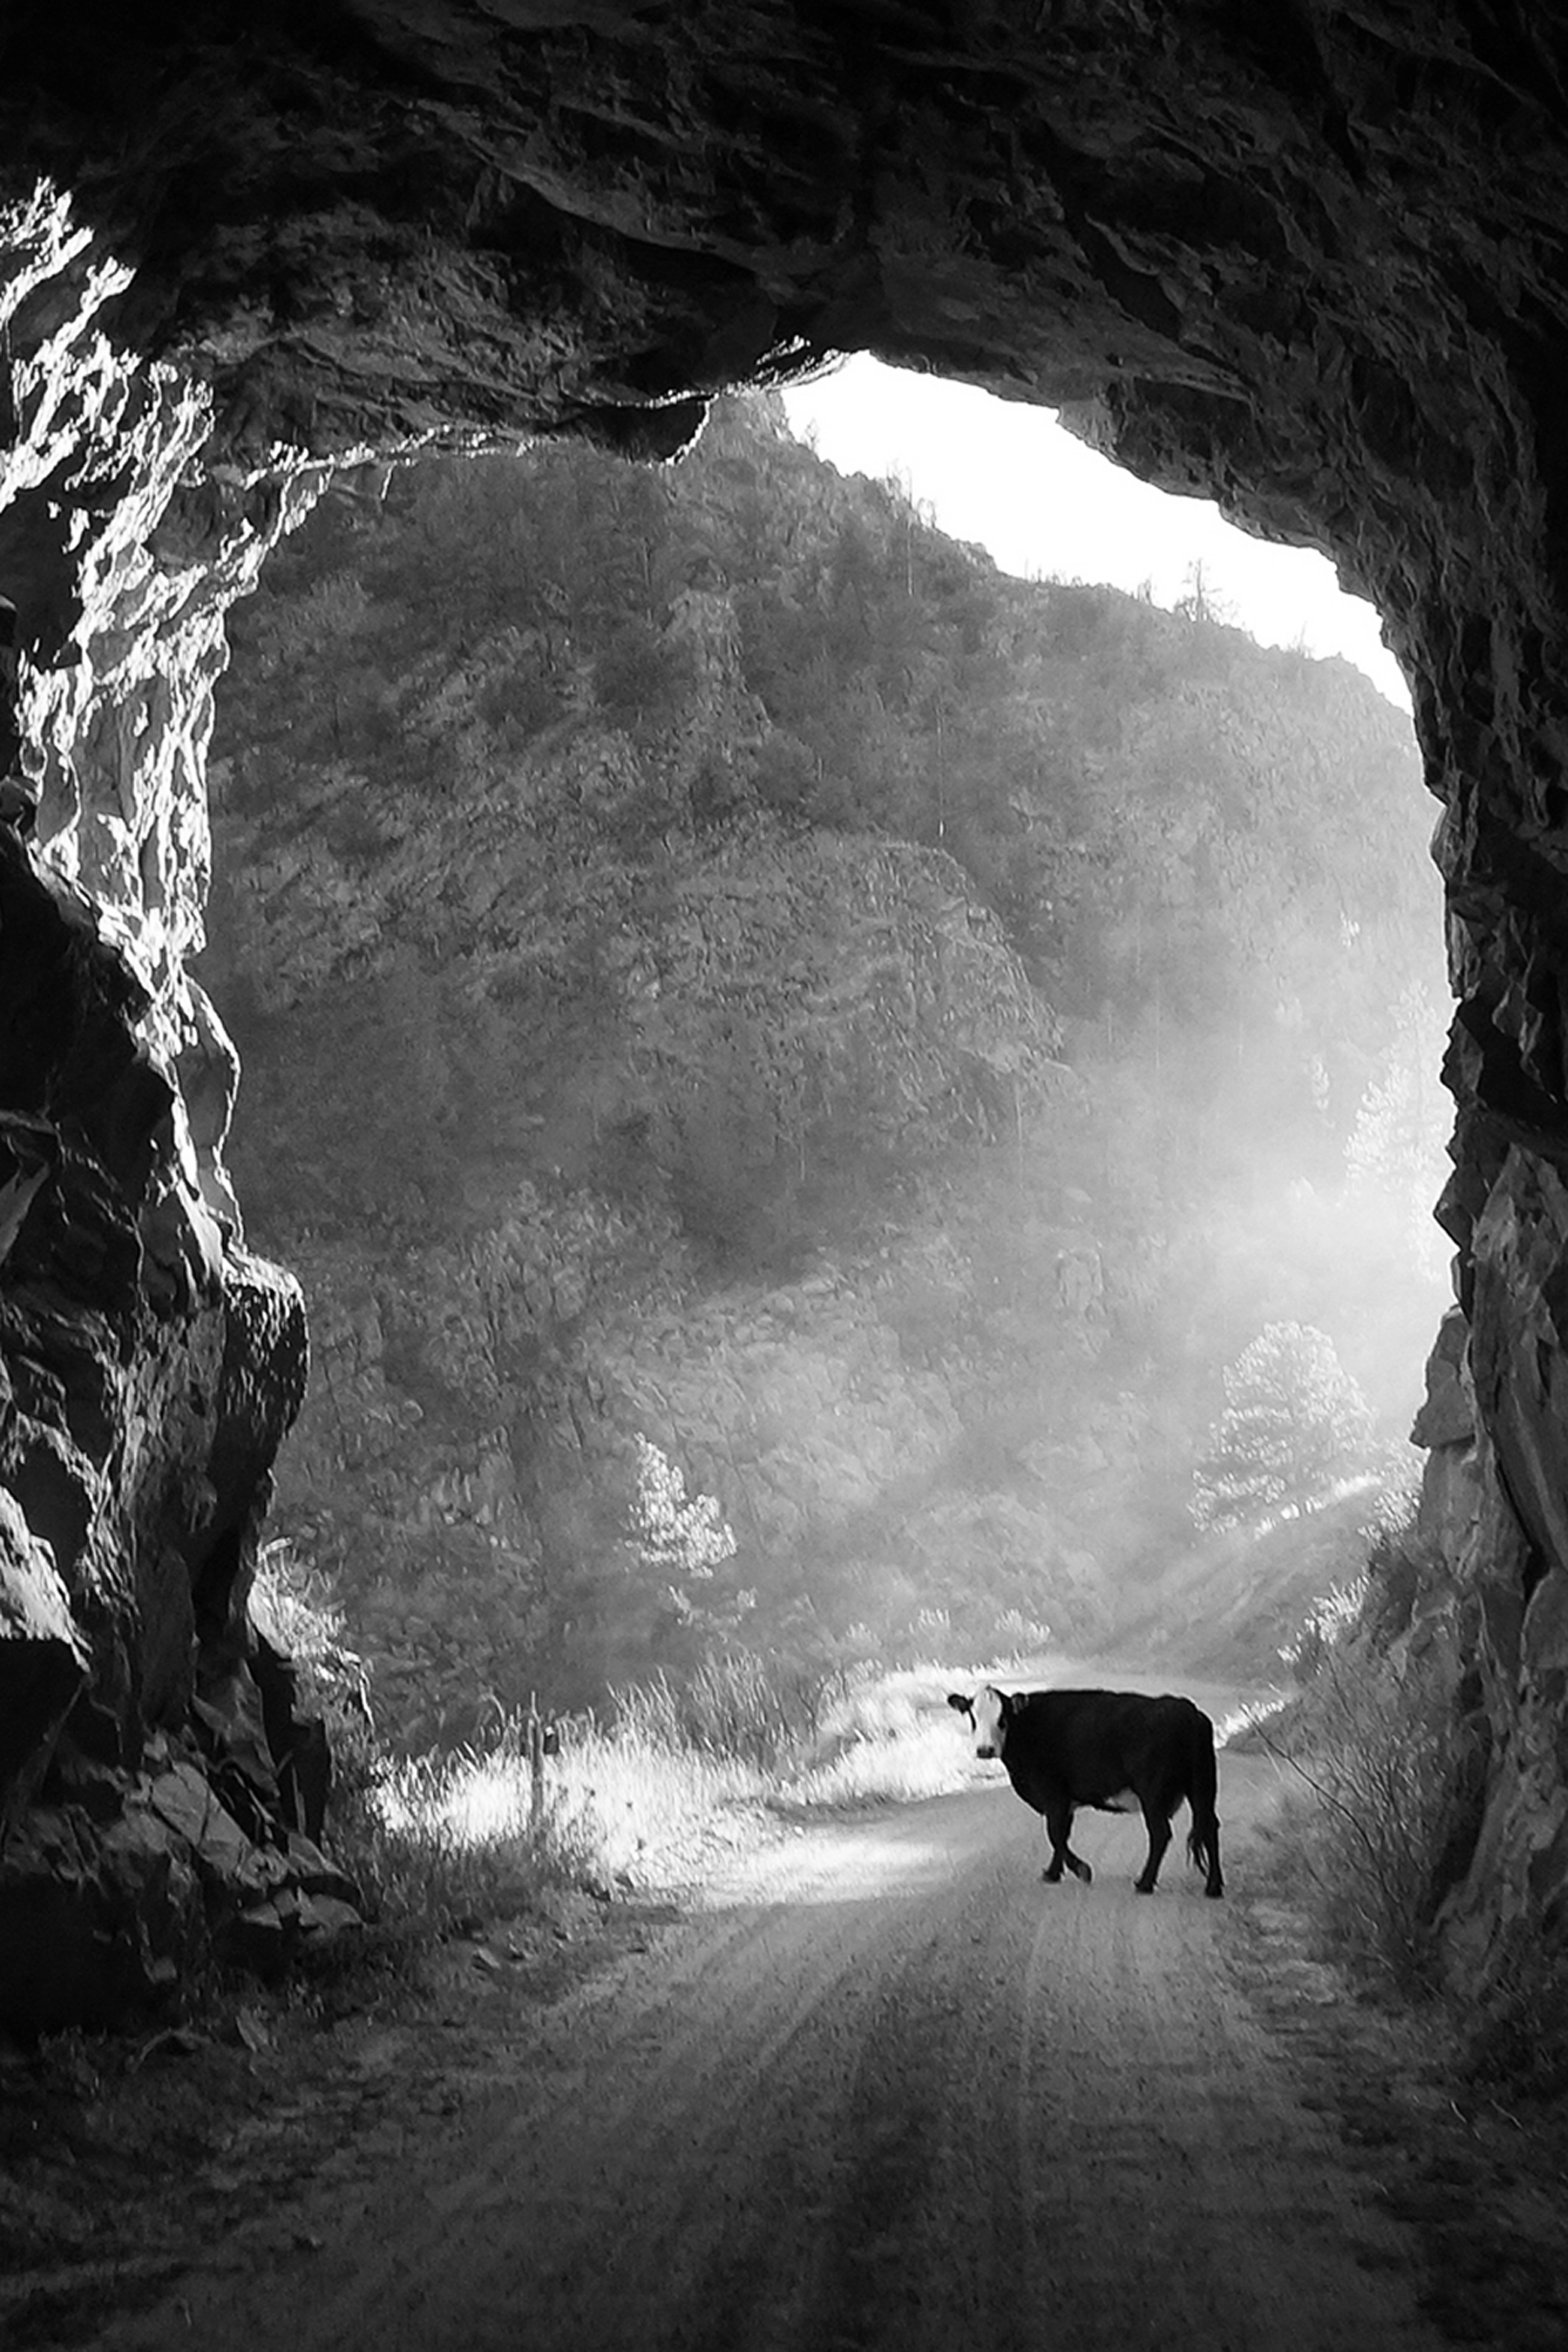 Cow in Miner’s Tunnel